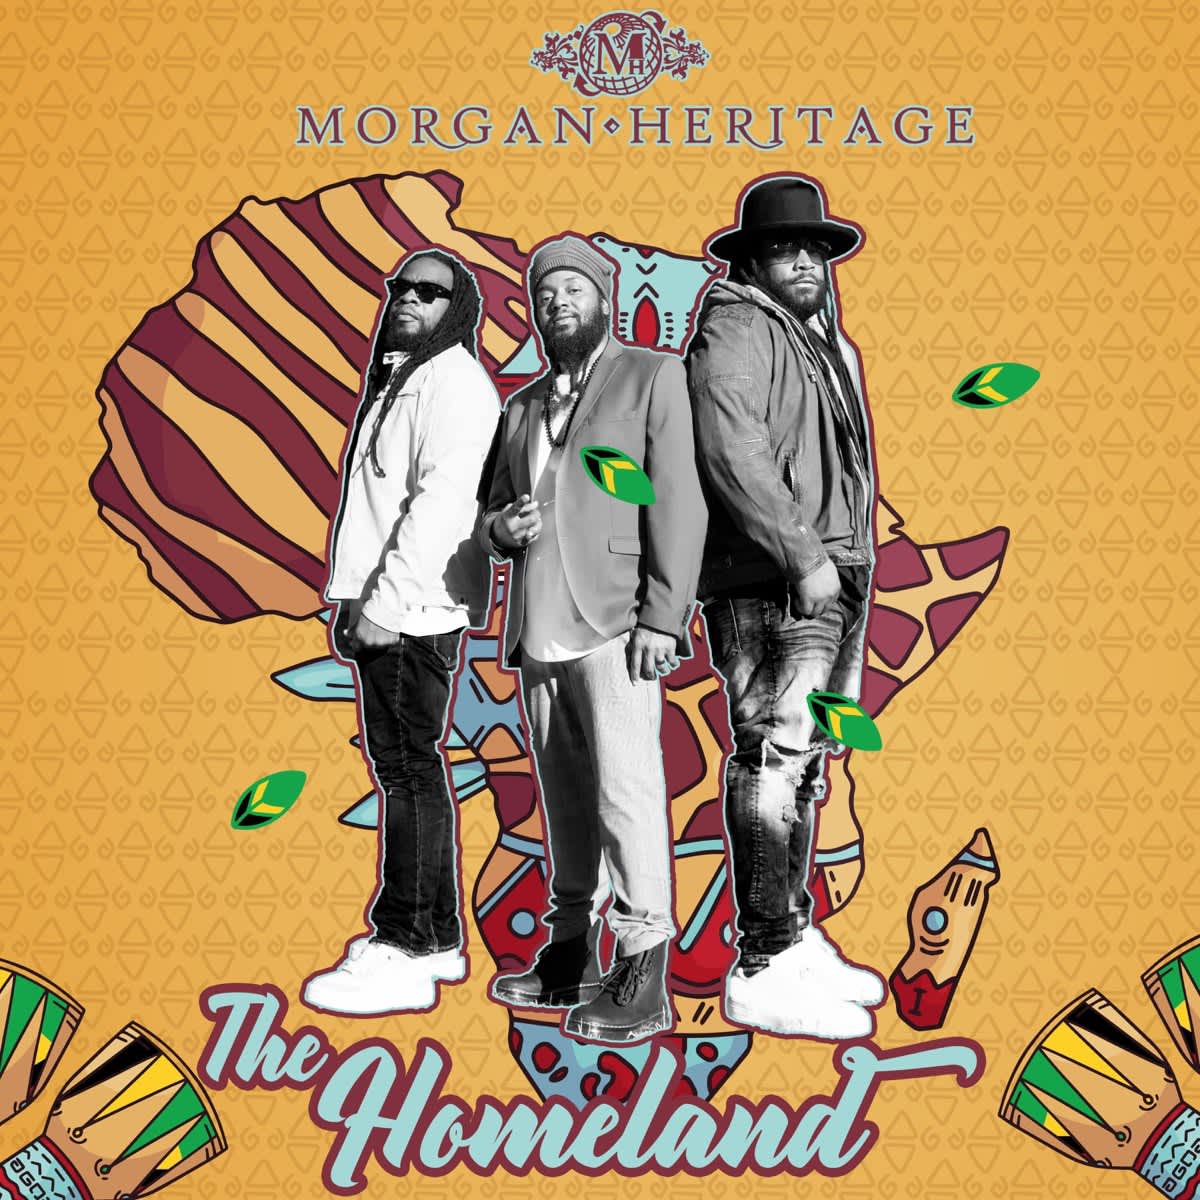 Morgan Heritage return with long awaited album &quot;The Homeland&quot;